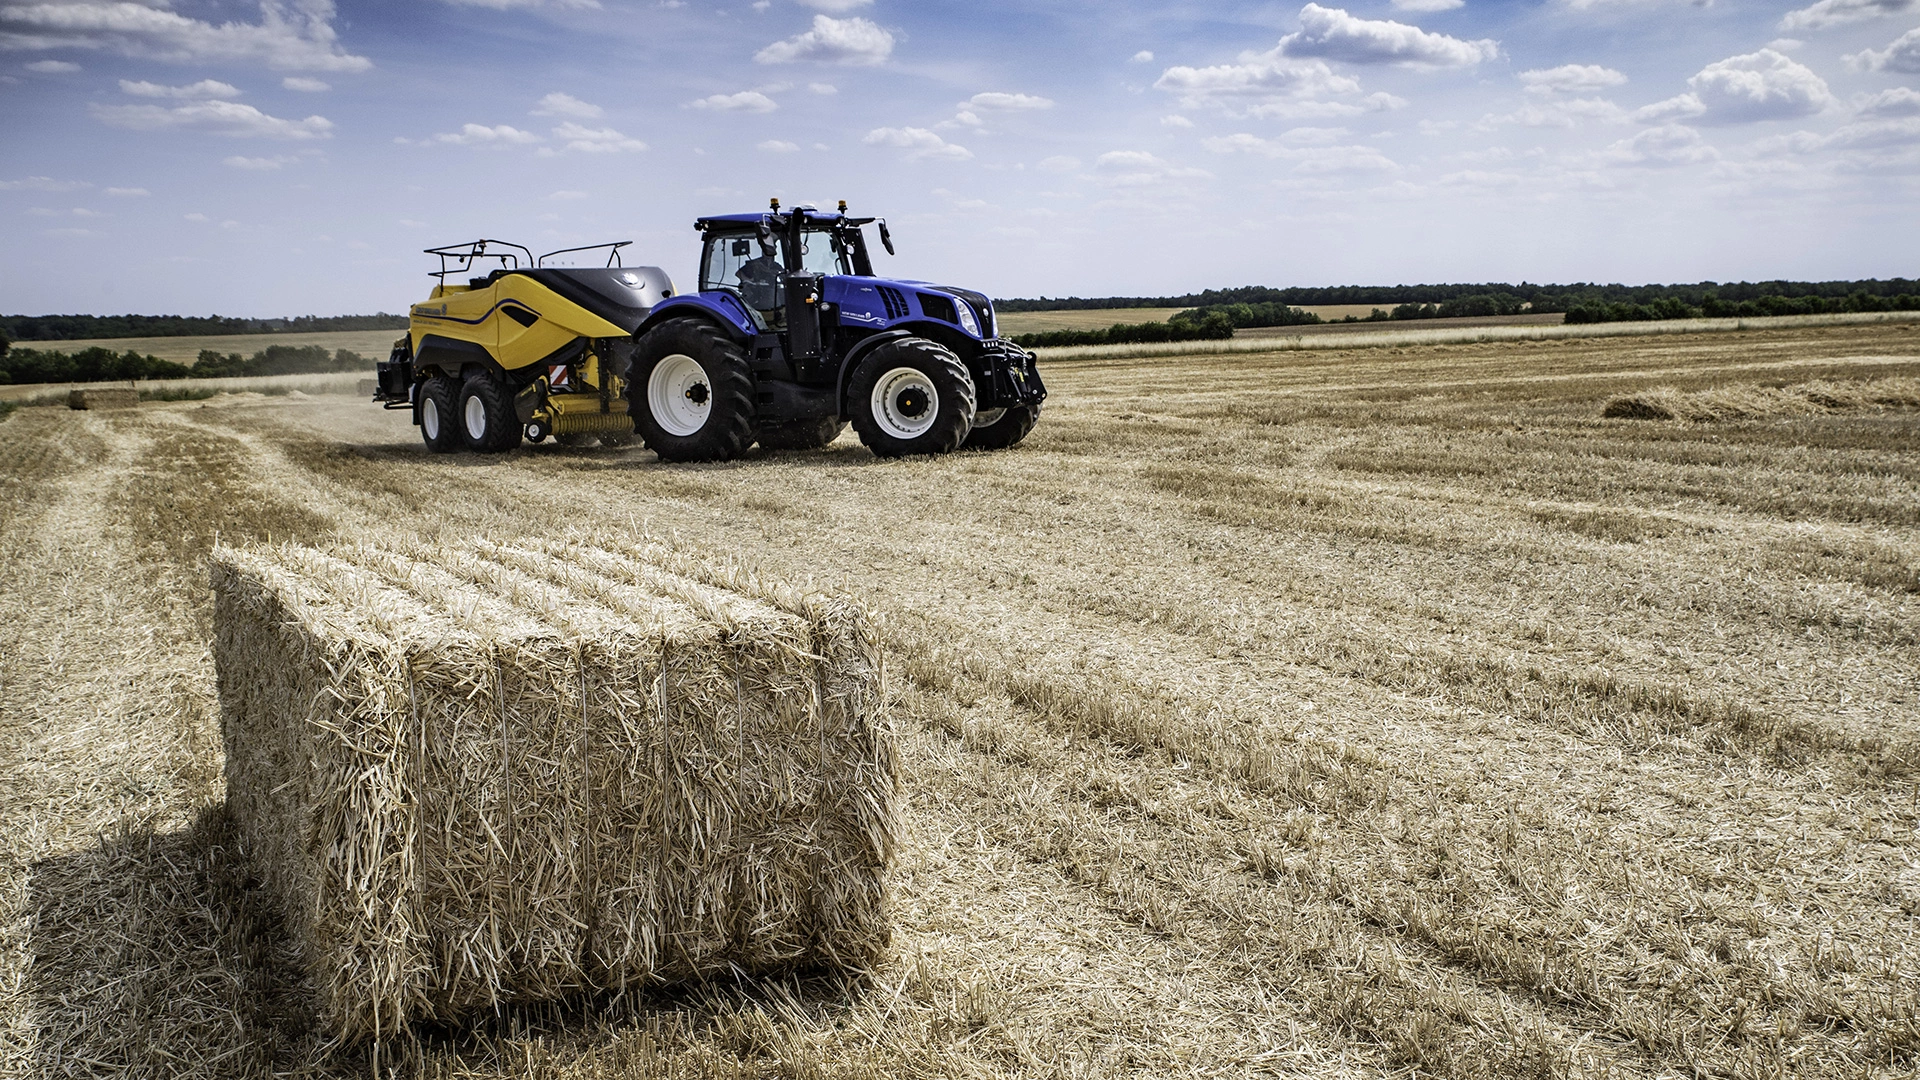 Farm tractor and Bigbaler High Density working in tandem, baling hay in the field